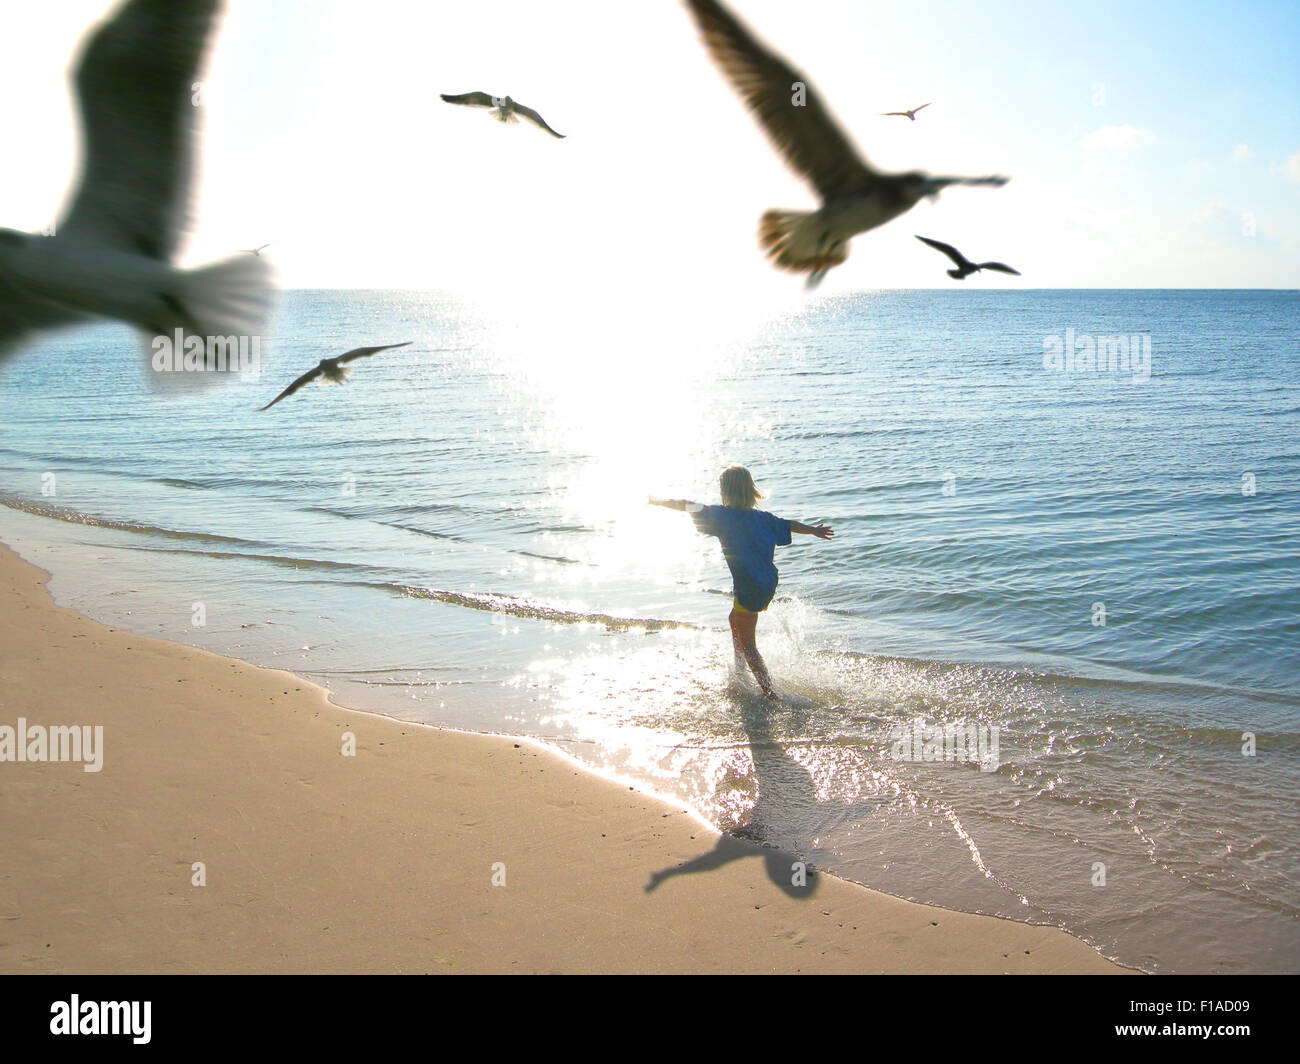 Girl Running Carefree On Sunny Beach With Seagulls Flying Stock Photo